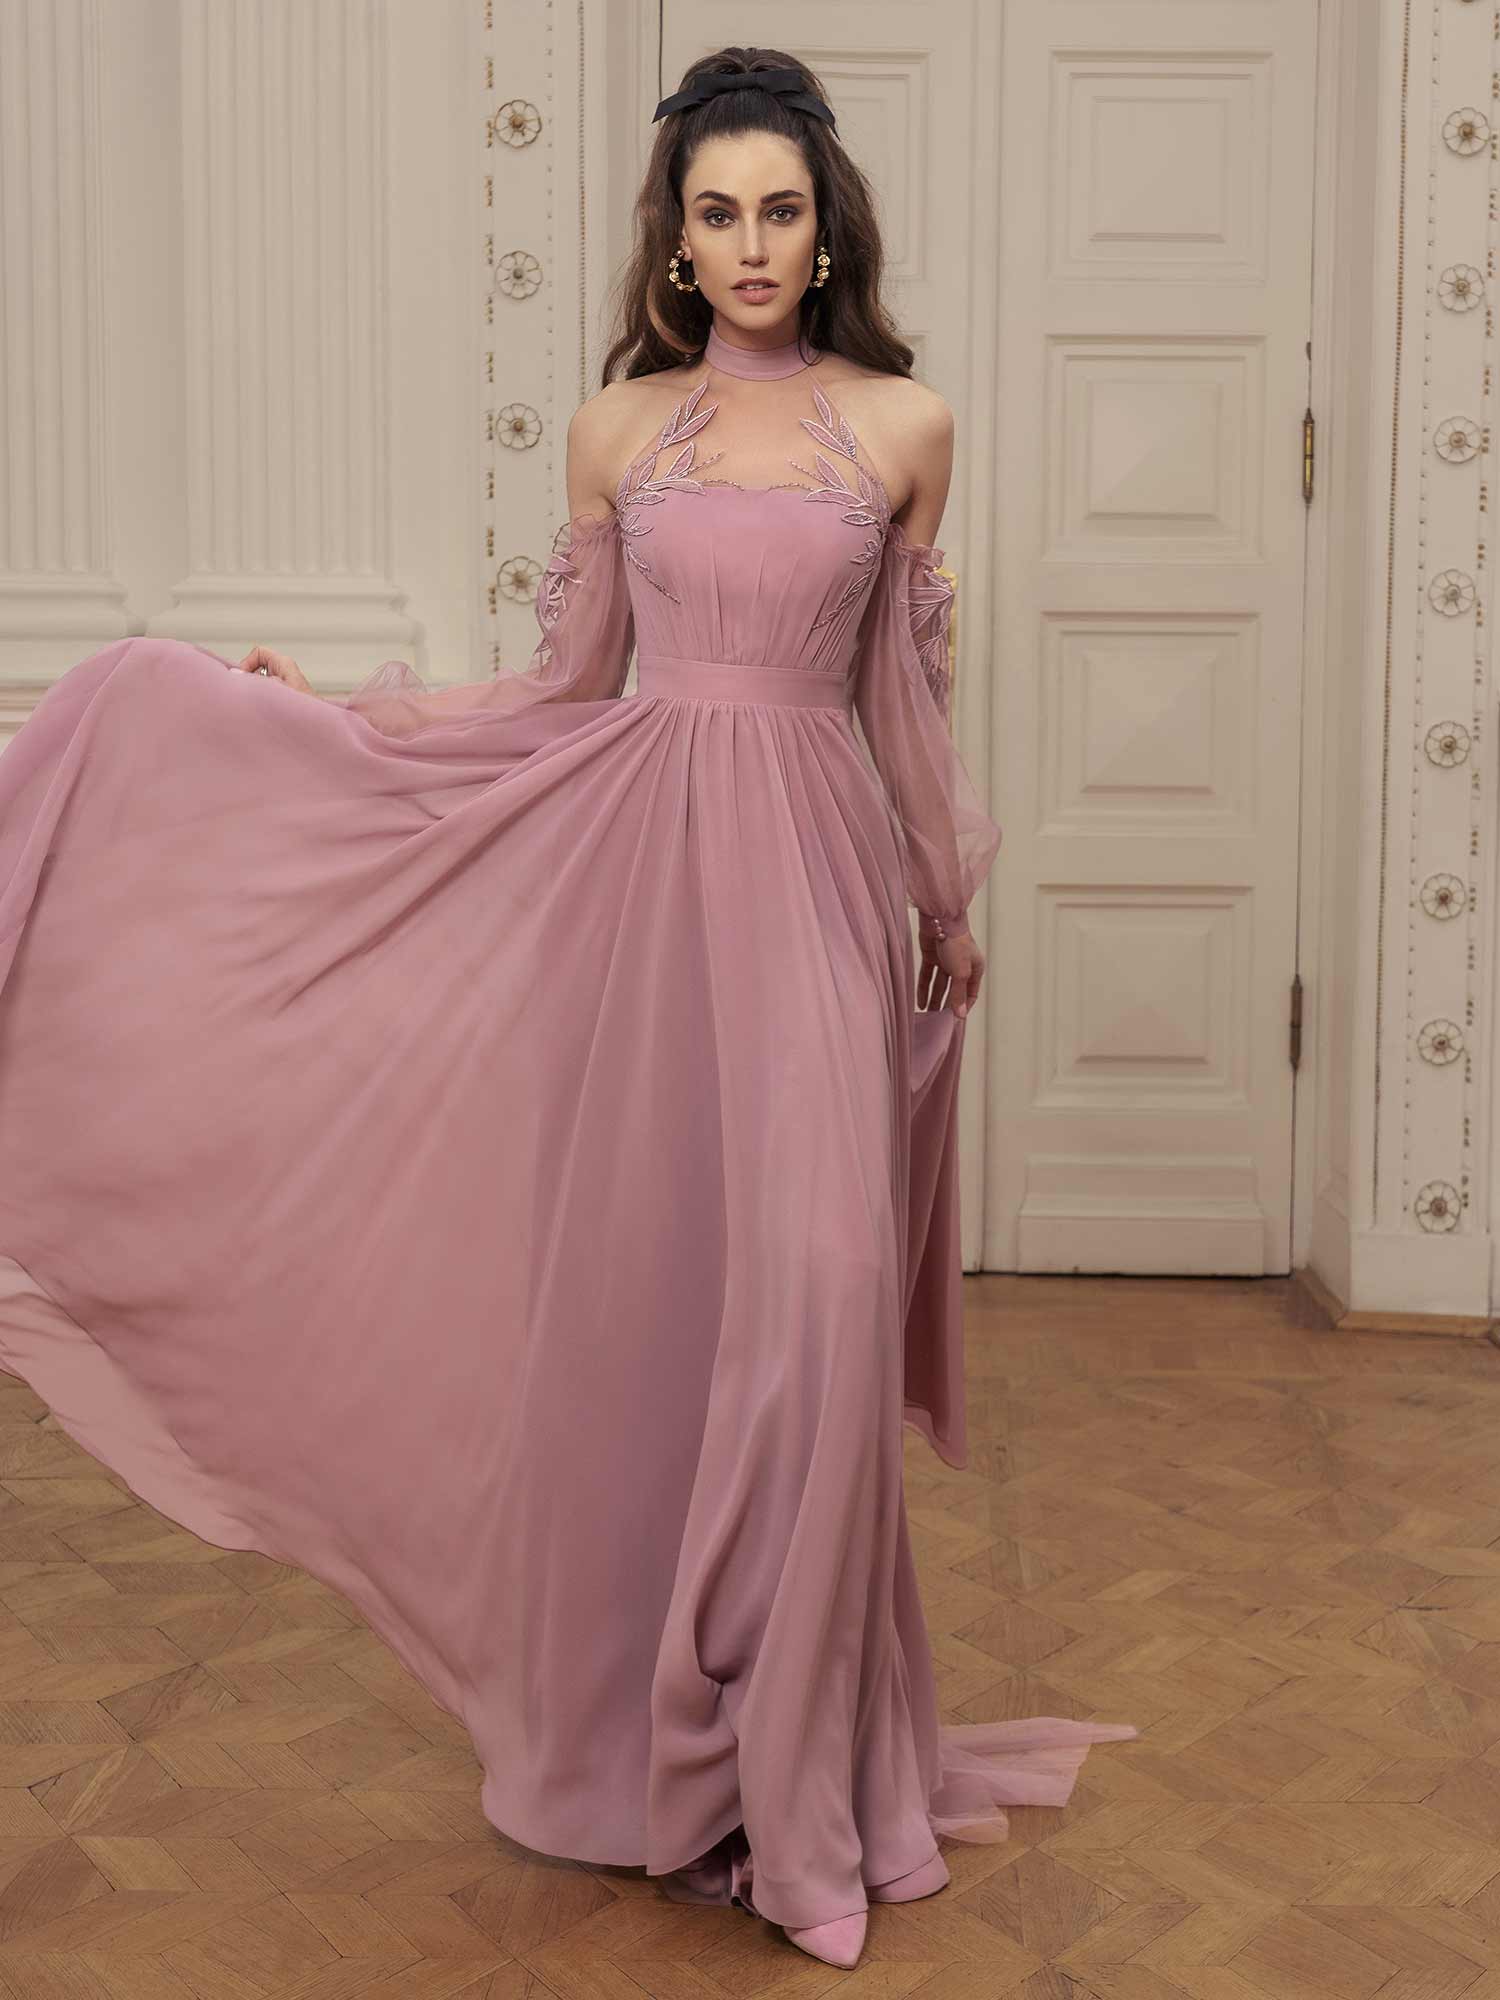 Evening gown with high neckline, bishop sleeves, and cape